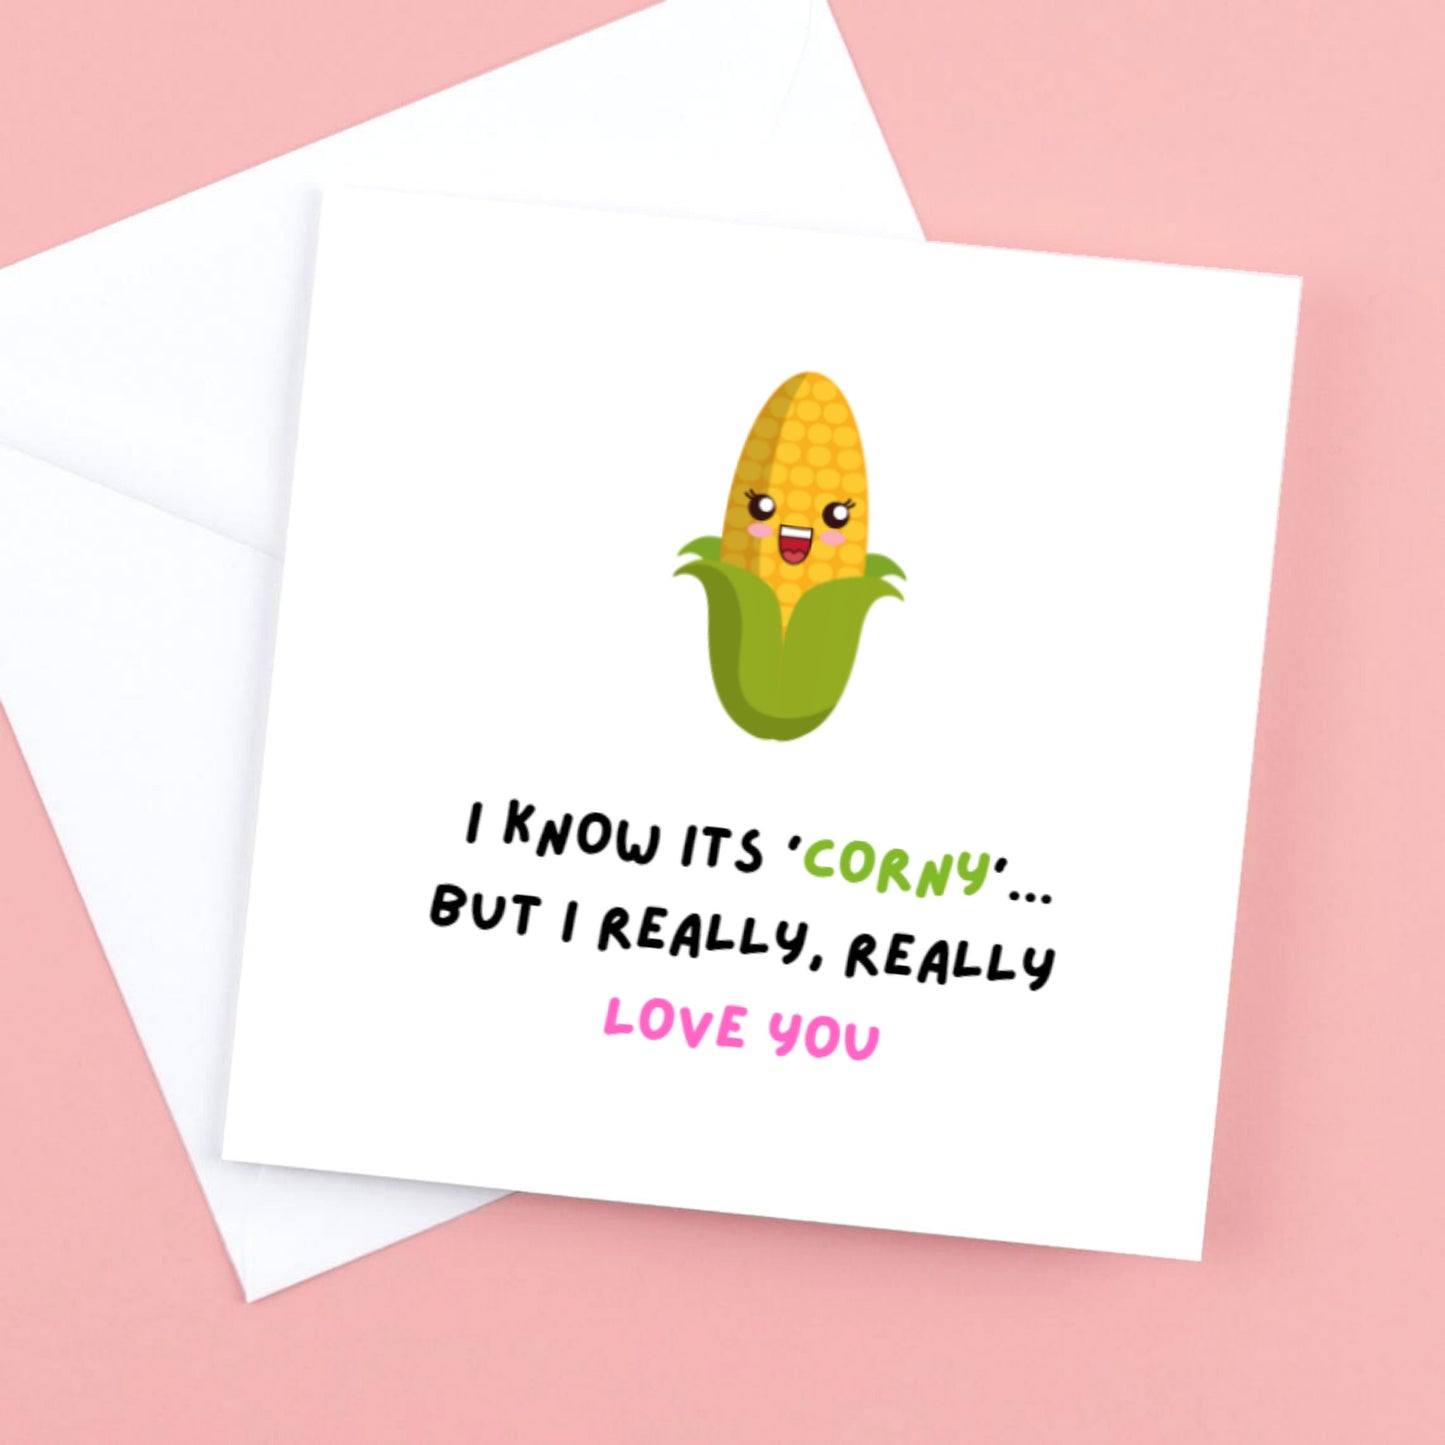 Valentines Card for those Corny partners out there.